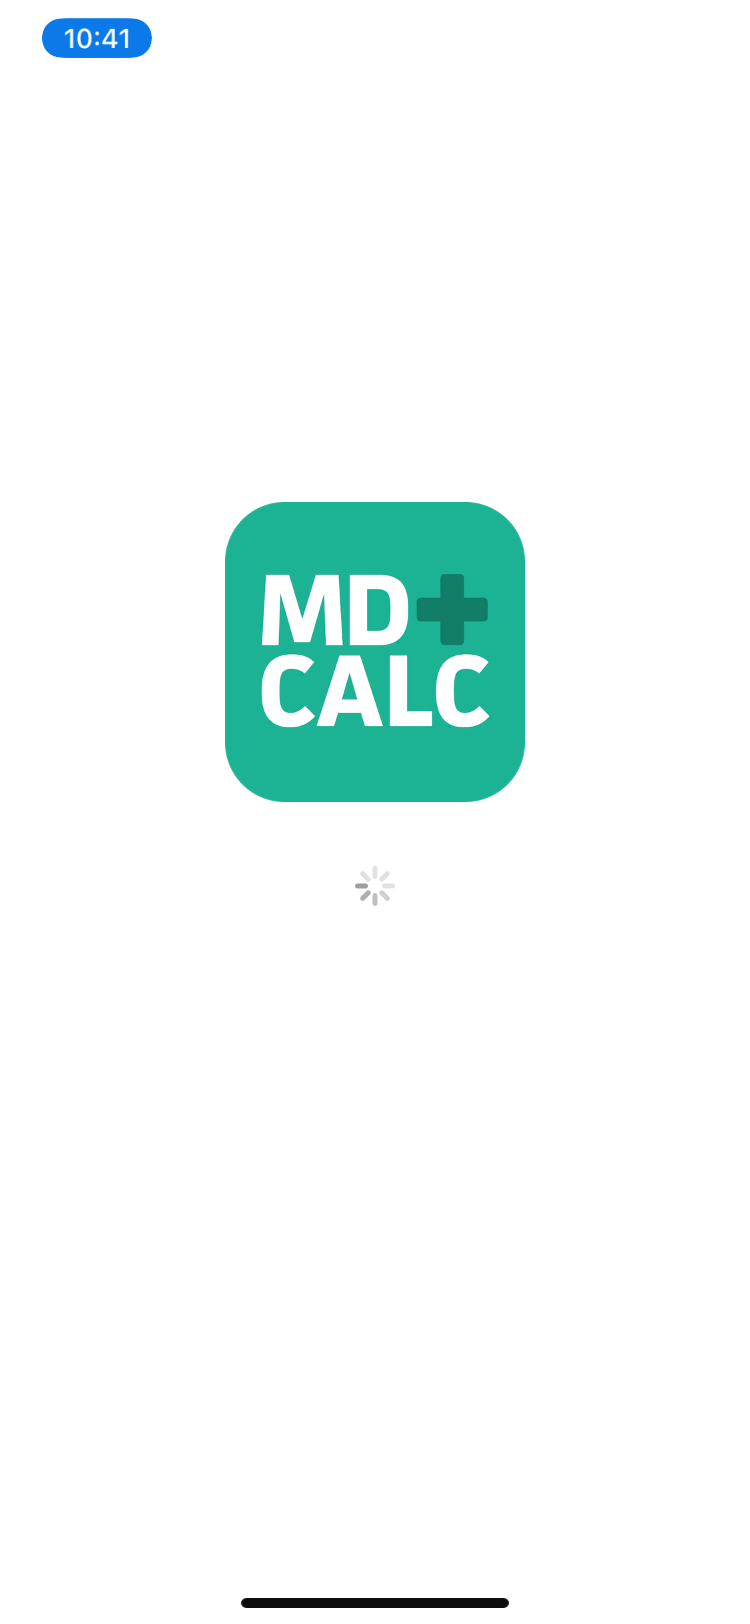 mdcalc startup page